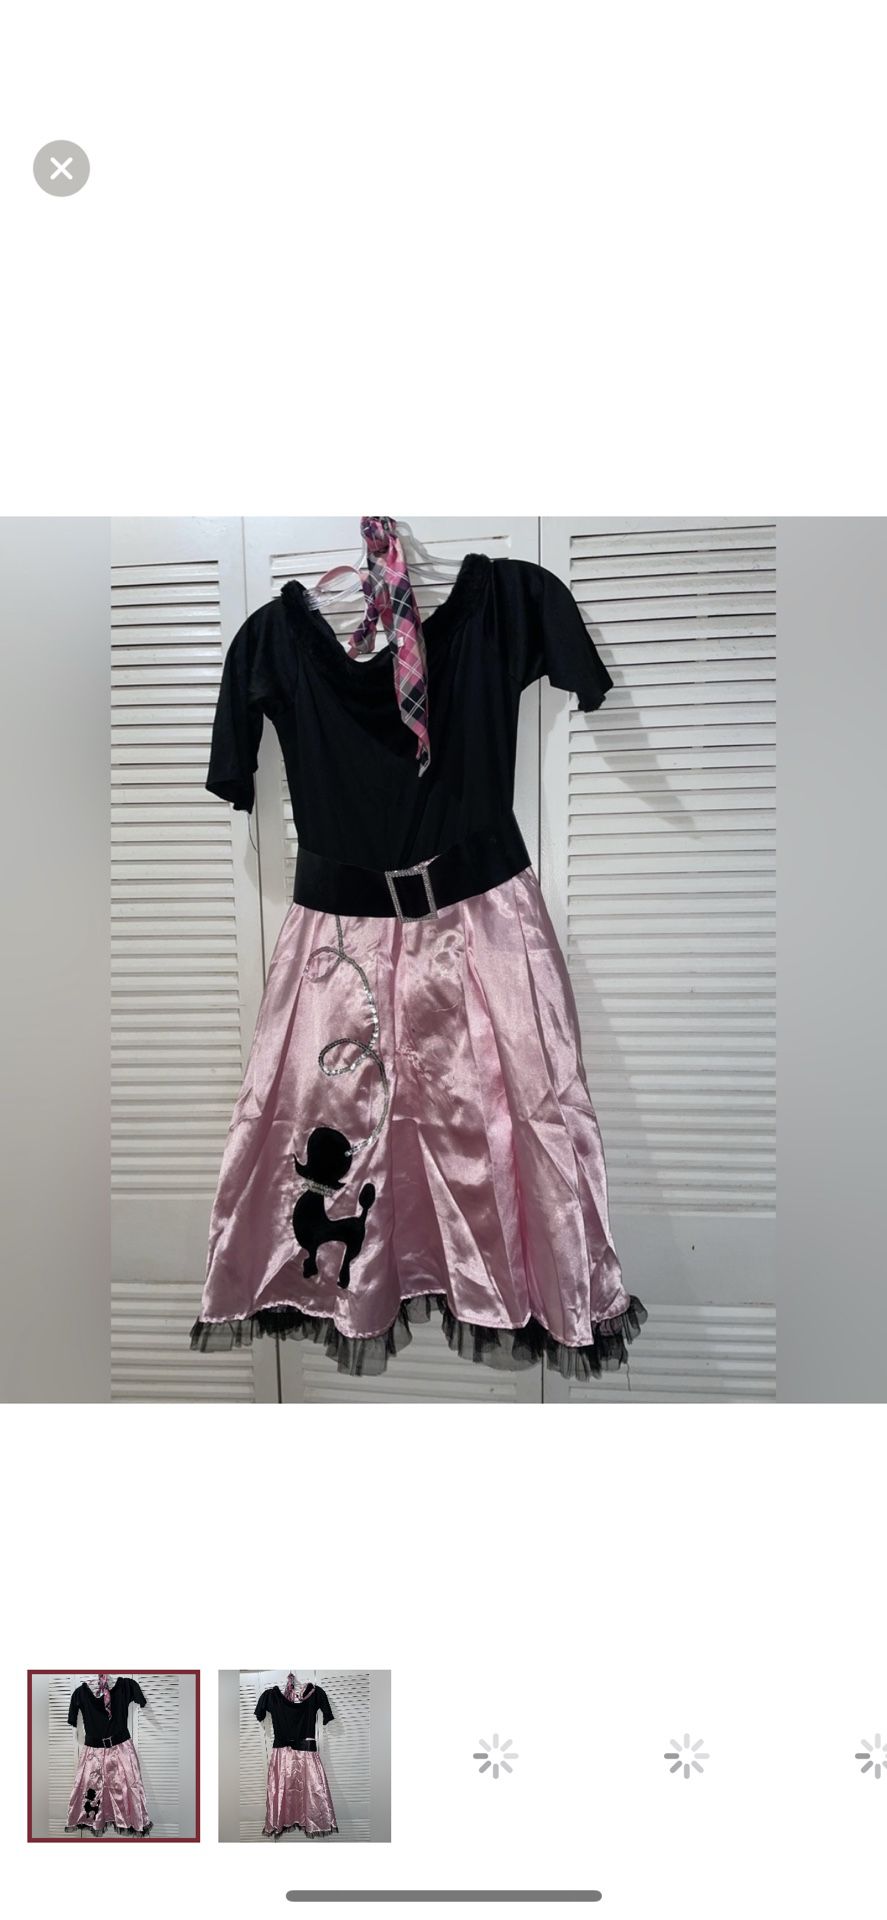 Grease Poodle Dress 50s Costume Adult Sock Hop Girl Outfit Size 12-14 Girls